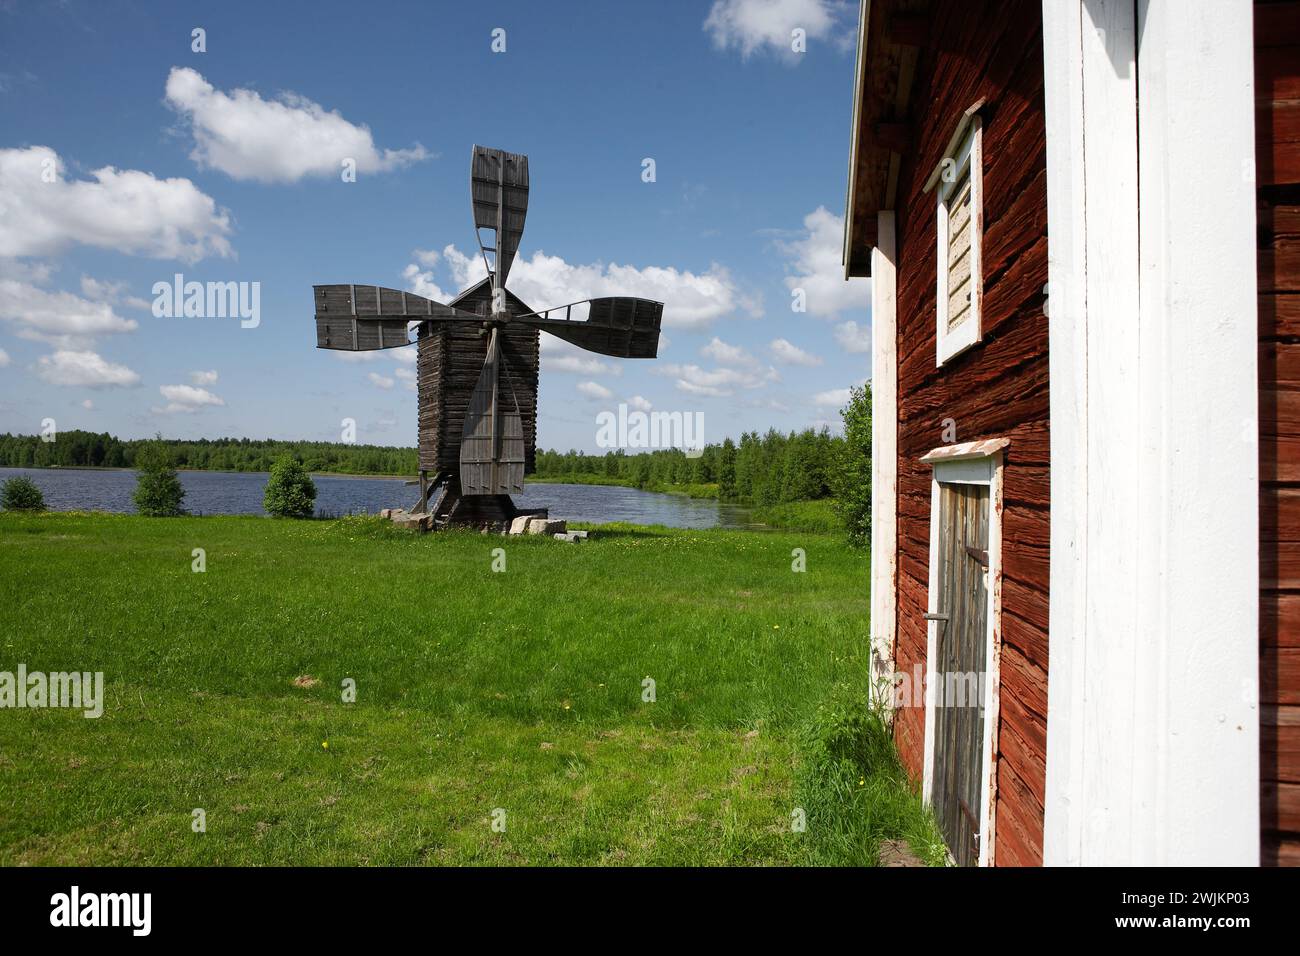 An old windmill by a lake Stock Photo